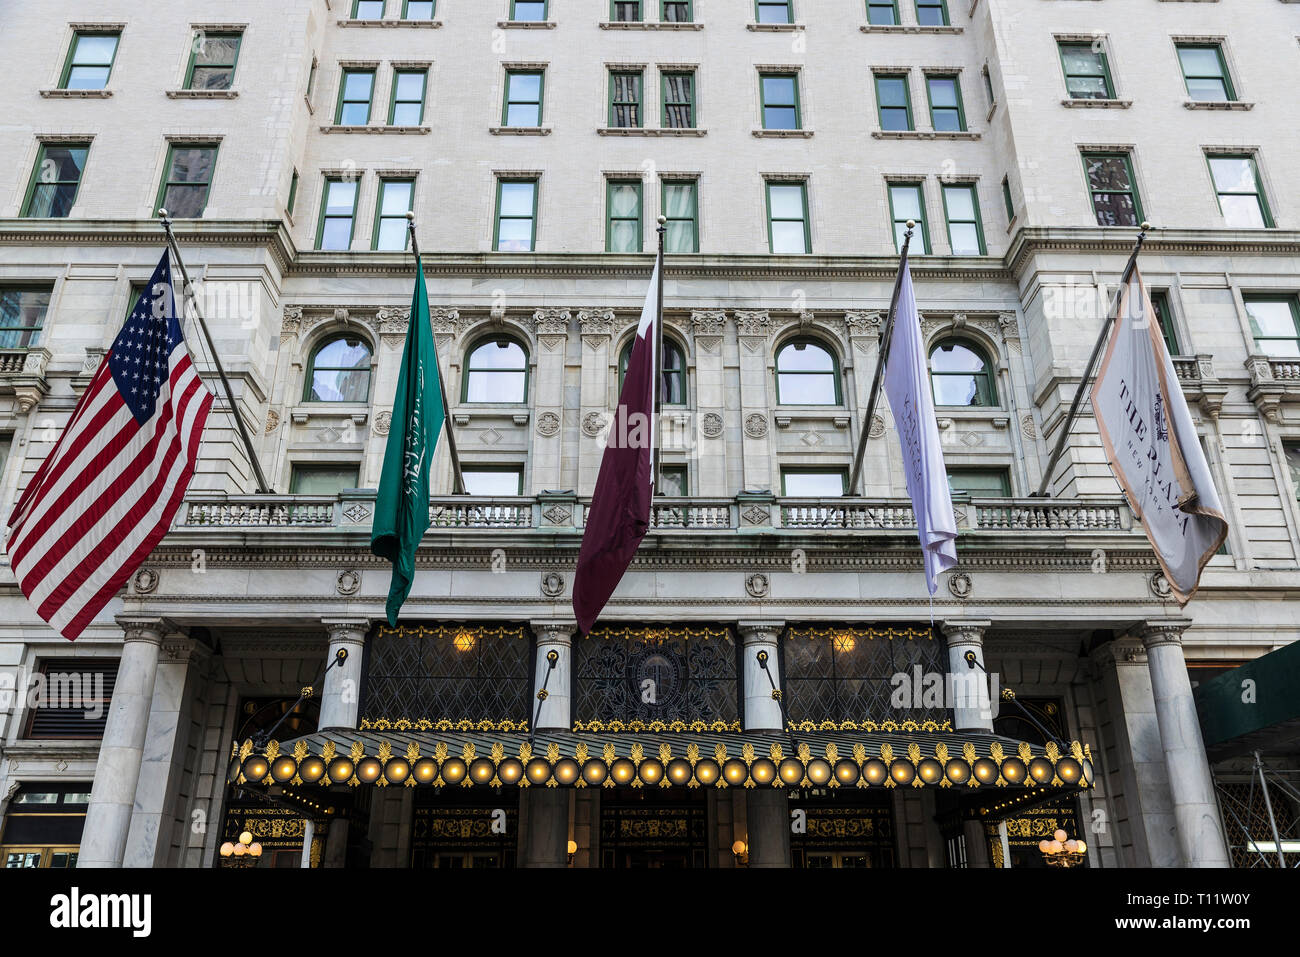 New York City, USA - July 28, 2018: Entrance of the Plaza Hotel, a luxury hotel and condominium apartment building in the Midtown Manhattan next to Ce Stock Photo